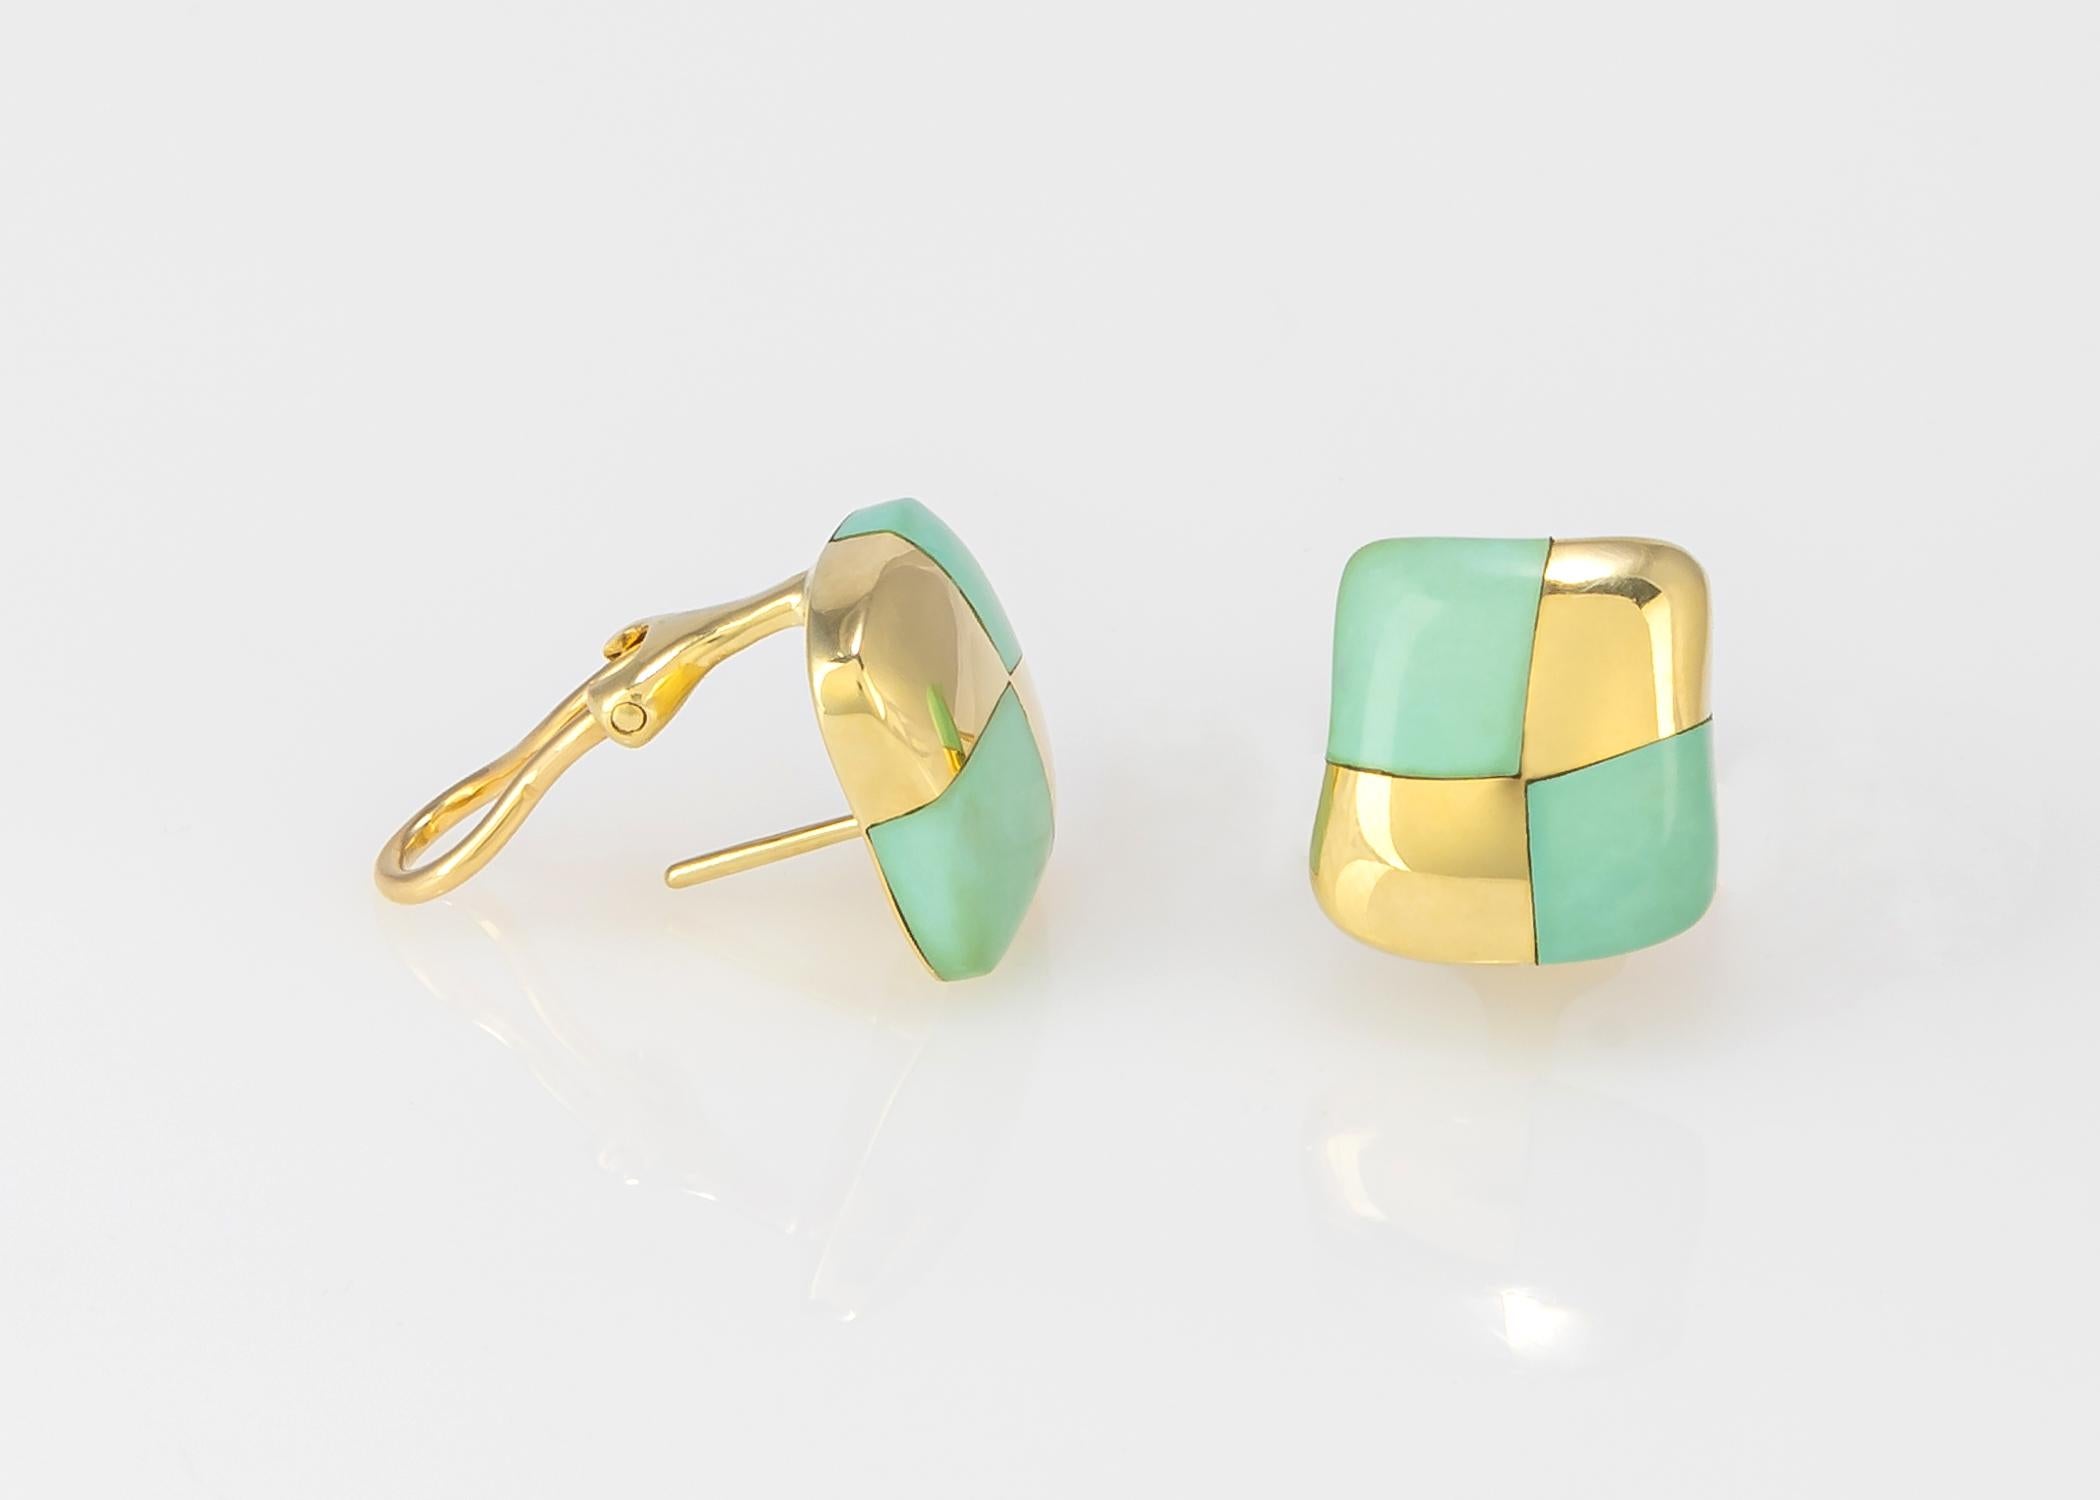 Angela Cummings began her career with Tiffany & Co. in 1967 and founded her own company in 1984. Her designs are iconic and collectable. This simple checkerboard design features turquoise and 18k gold. A great easy to wear earring. 14.1 mm or